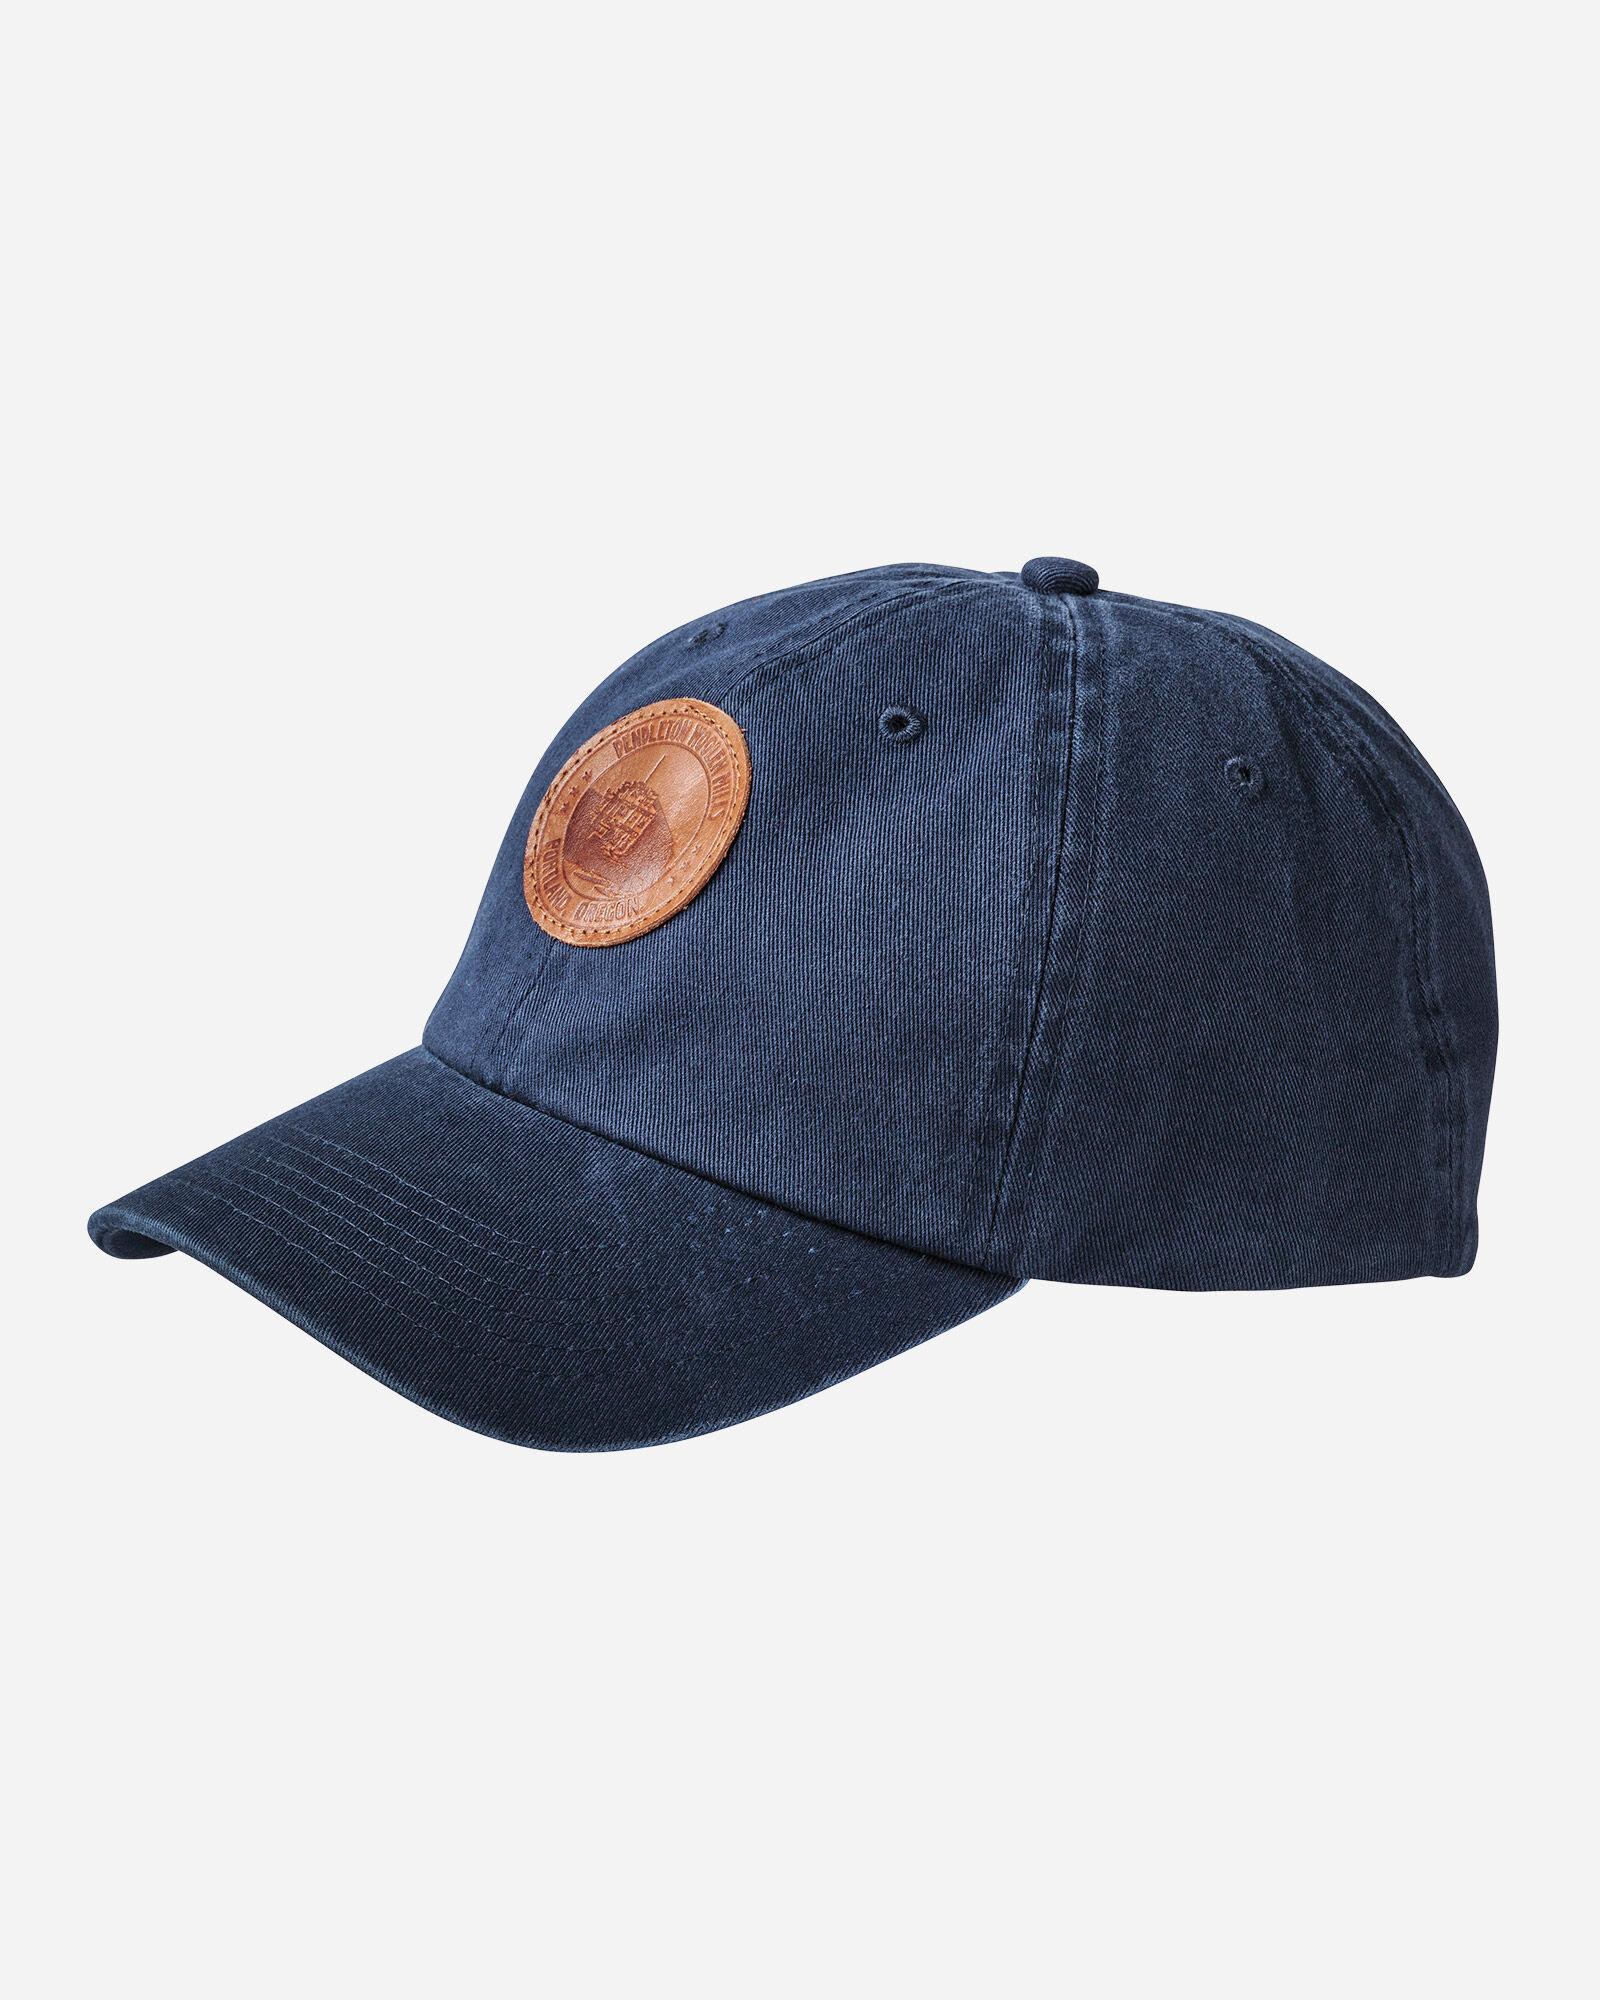  Cotton Hat W/Mill Patch : Navy